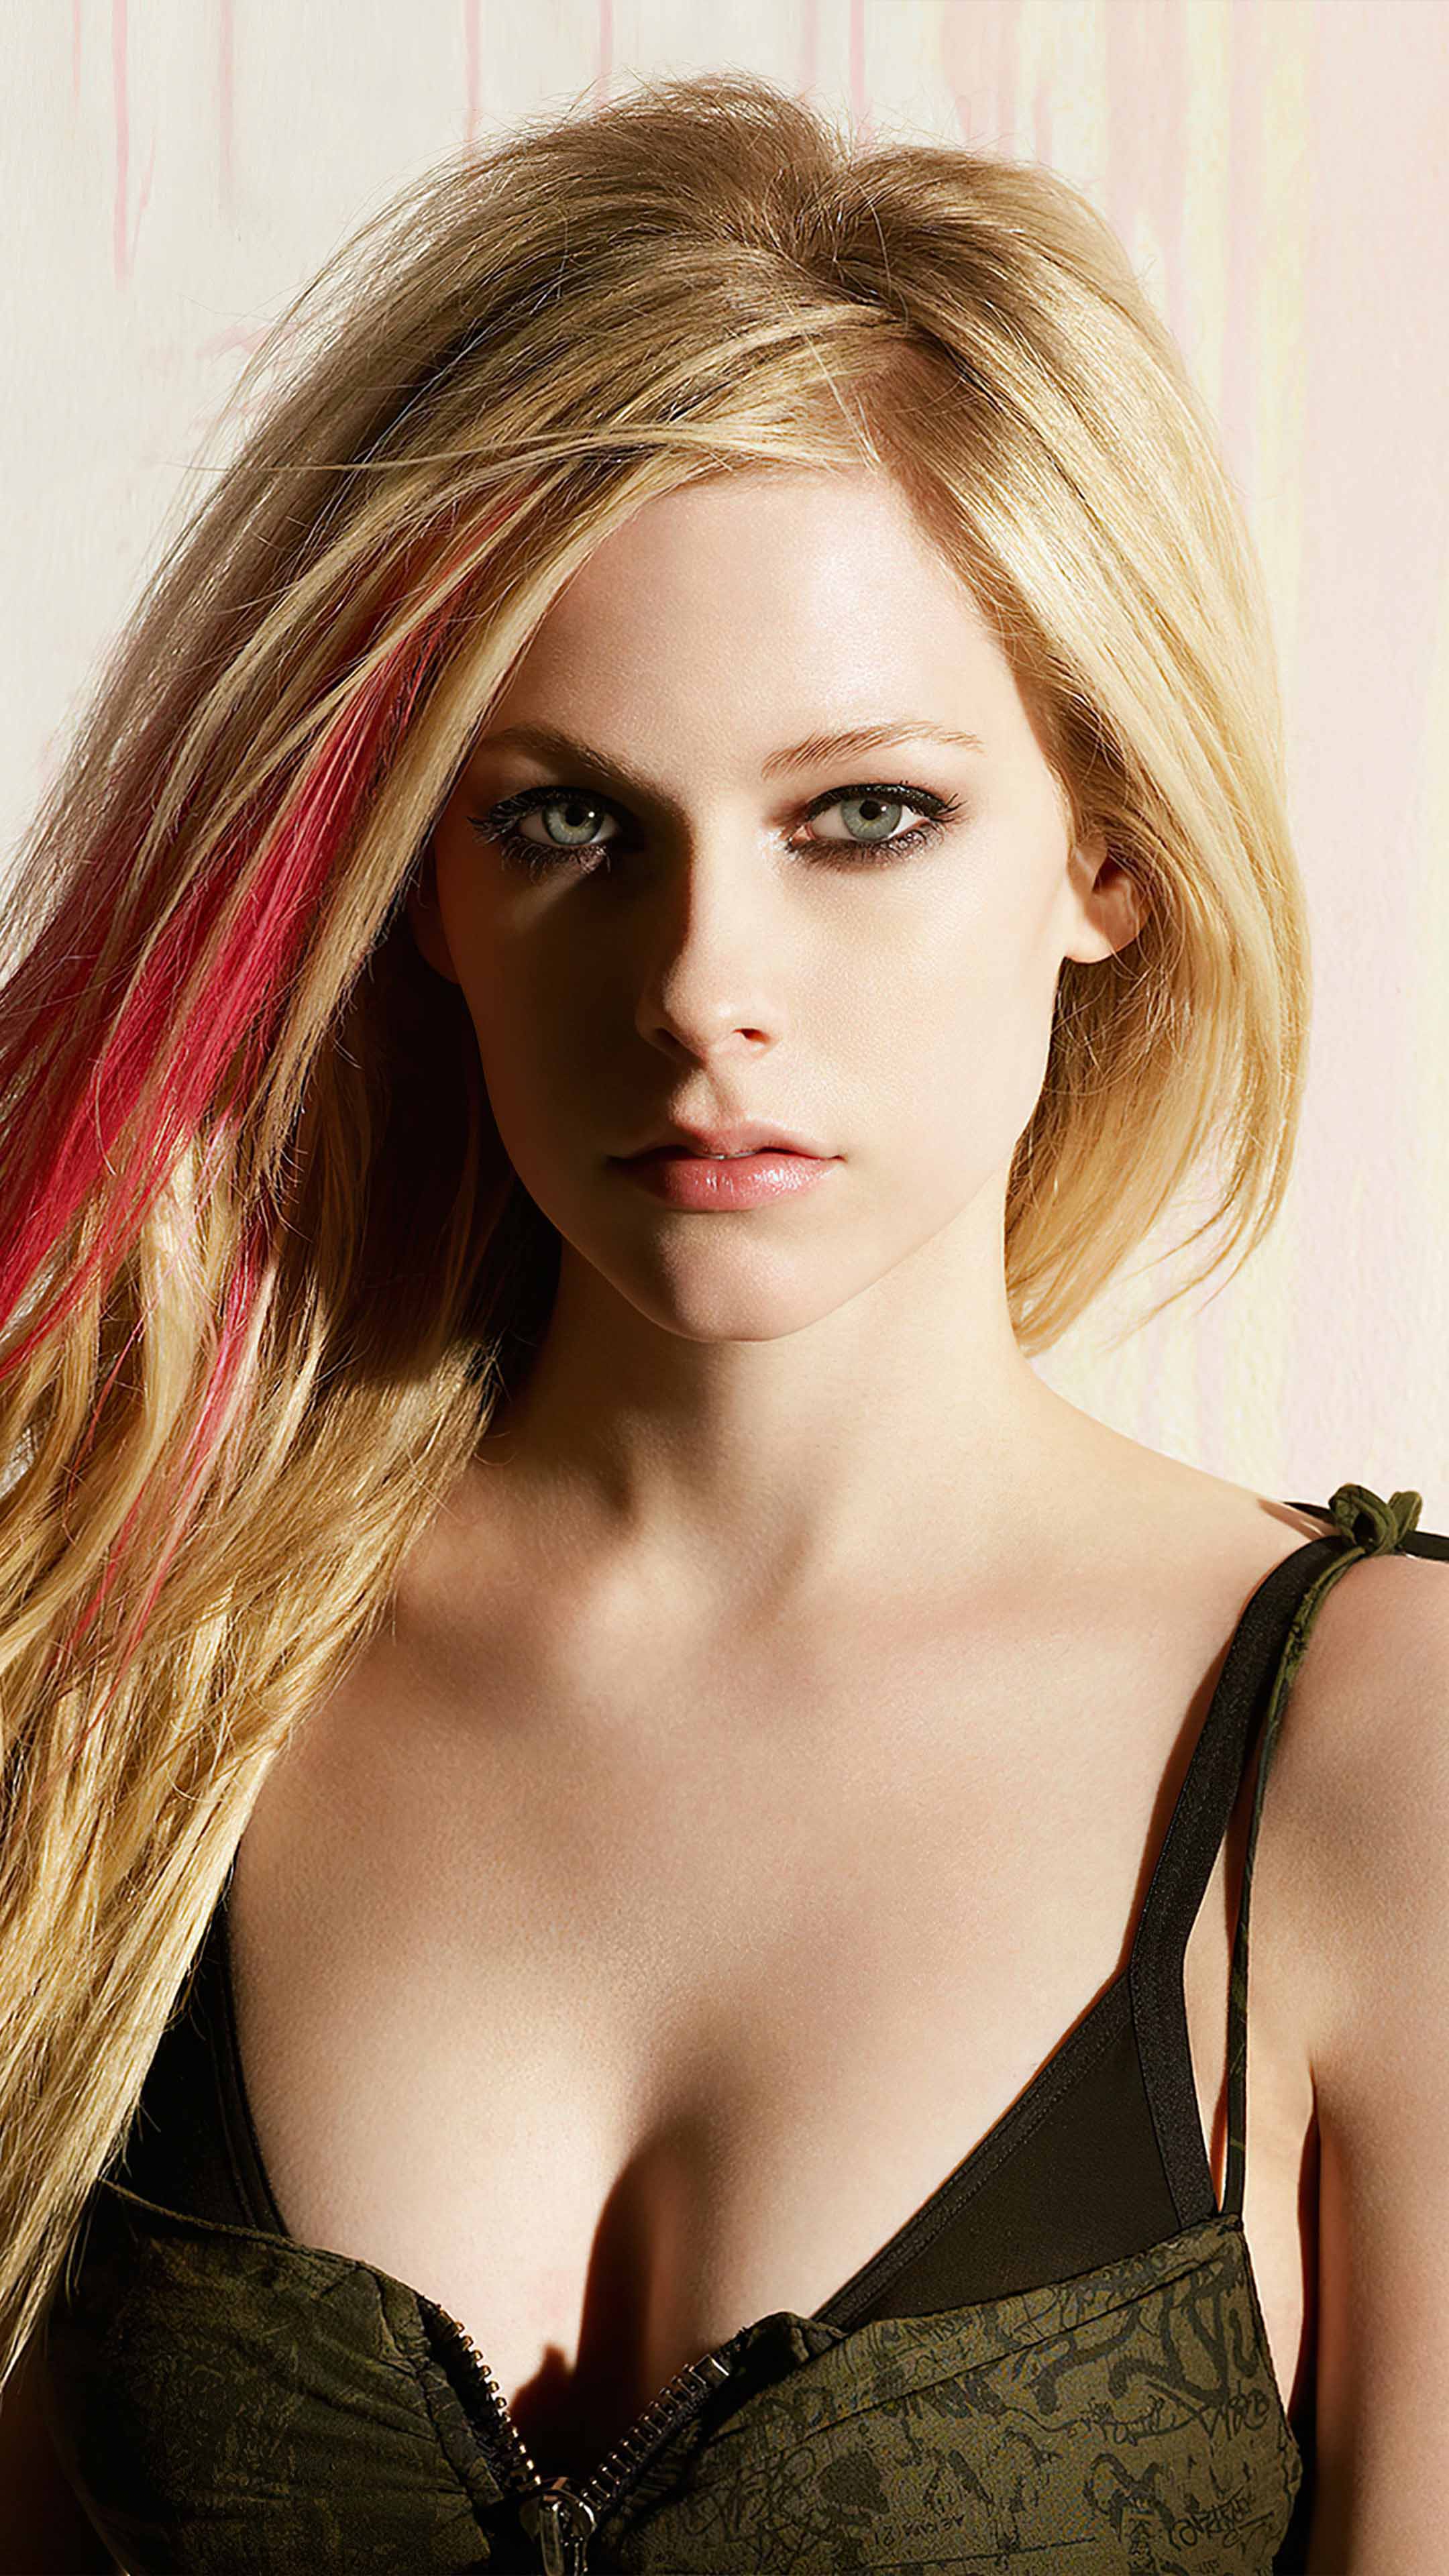 33 Avril Lavigne Hot Pictures - Which Are Sure To Attract 